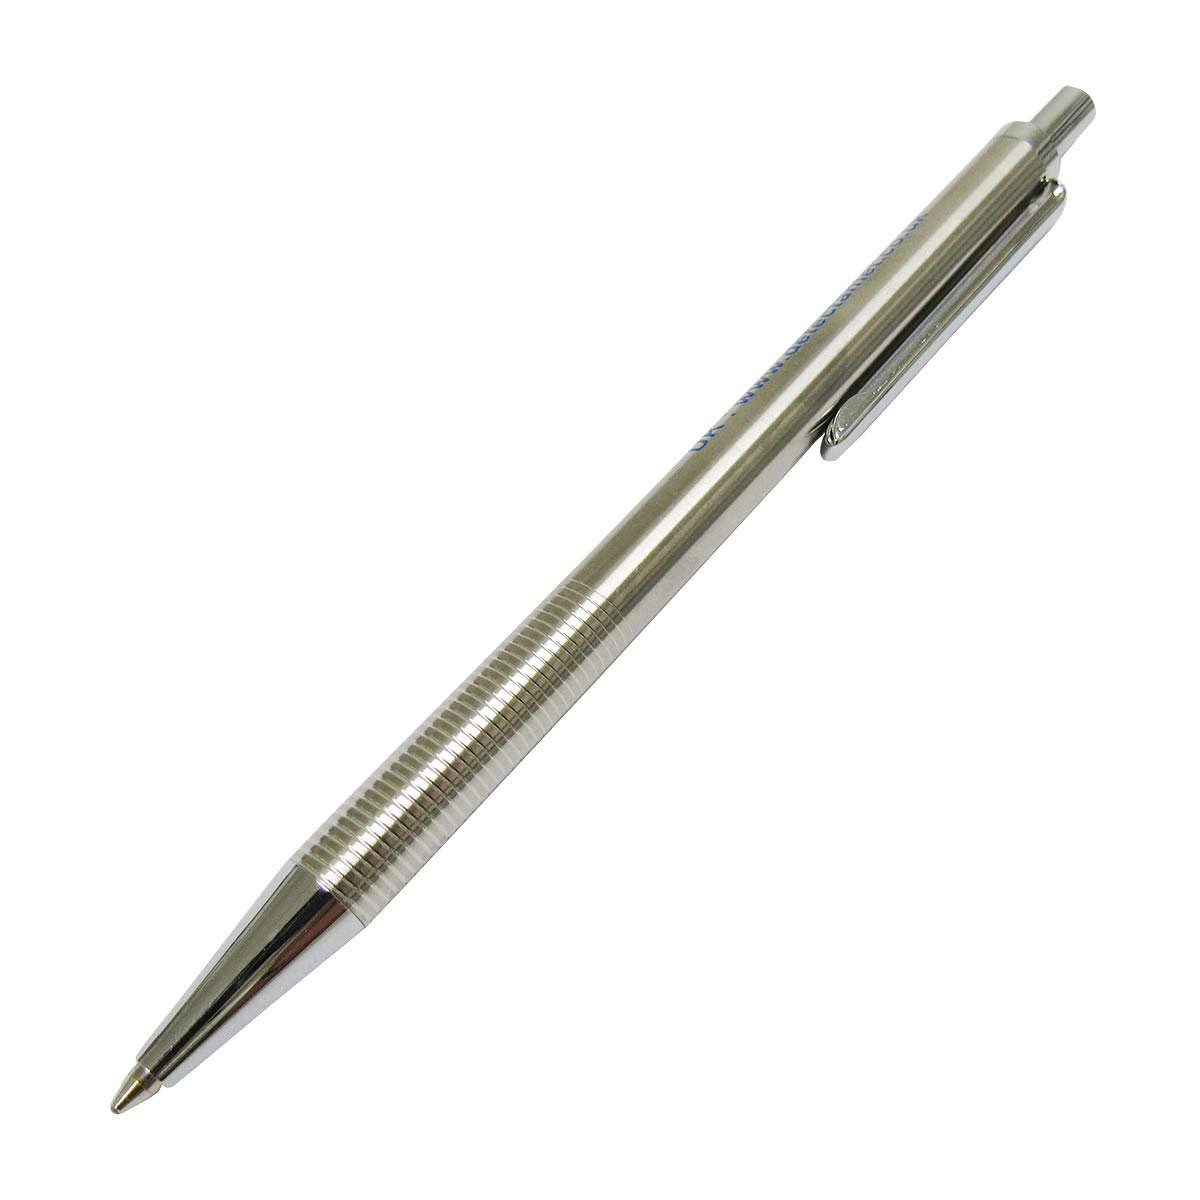 Stainless Steel Chrome Retractable Pen Black Ink Pack of 10